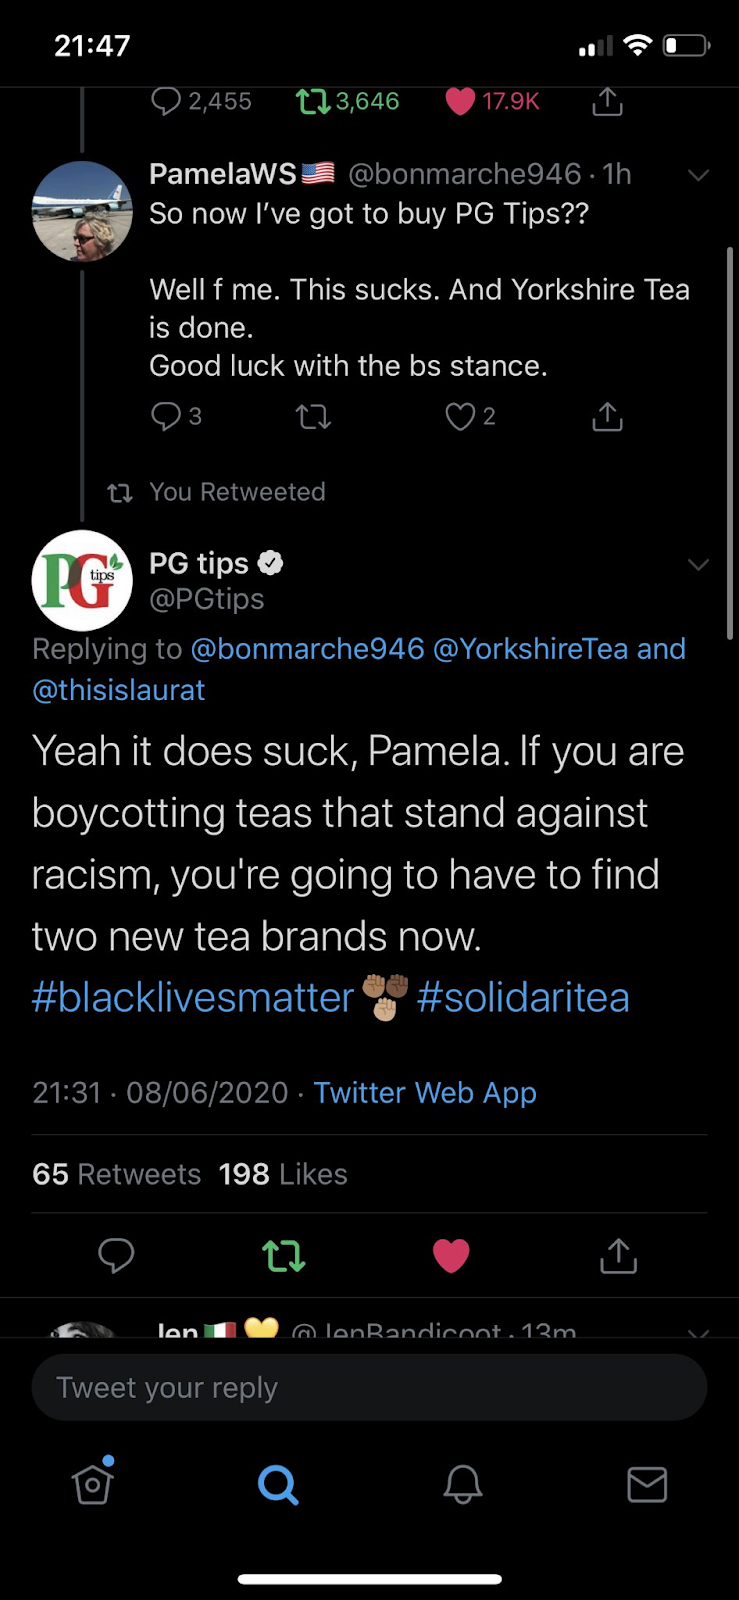 Imagw of PG tips tweeting to taking a stand against racism during the BLM movement. 